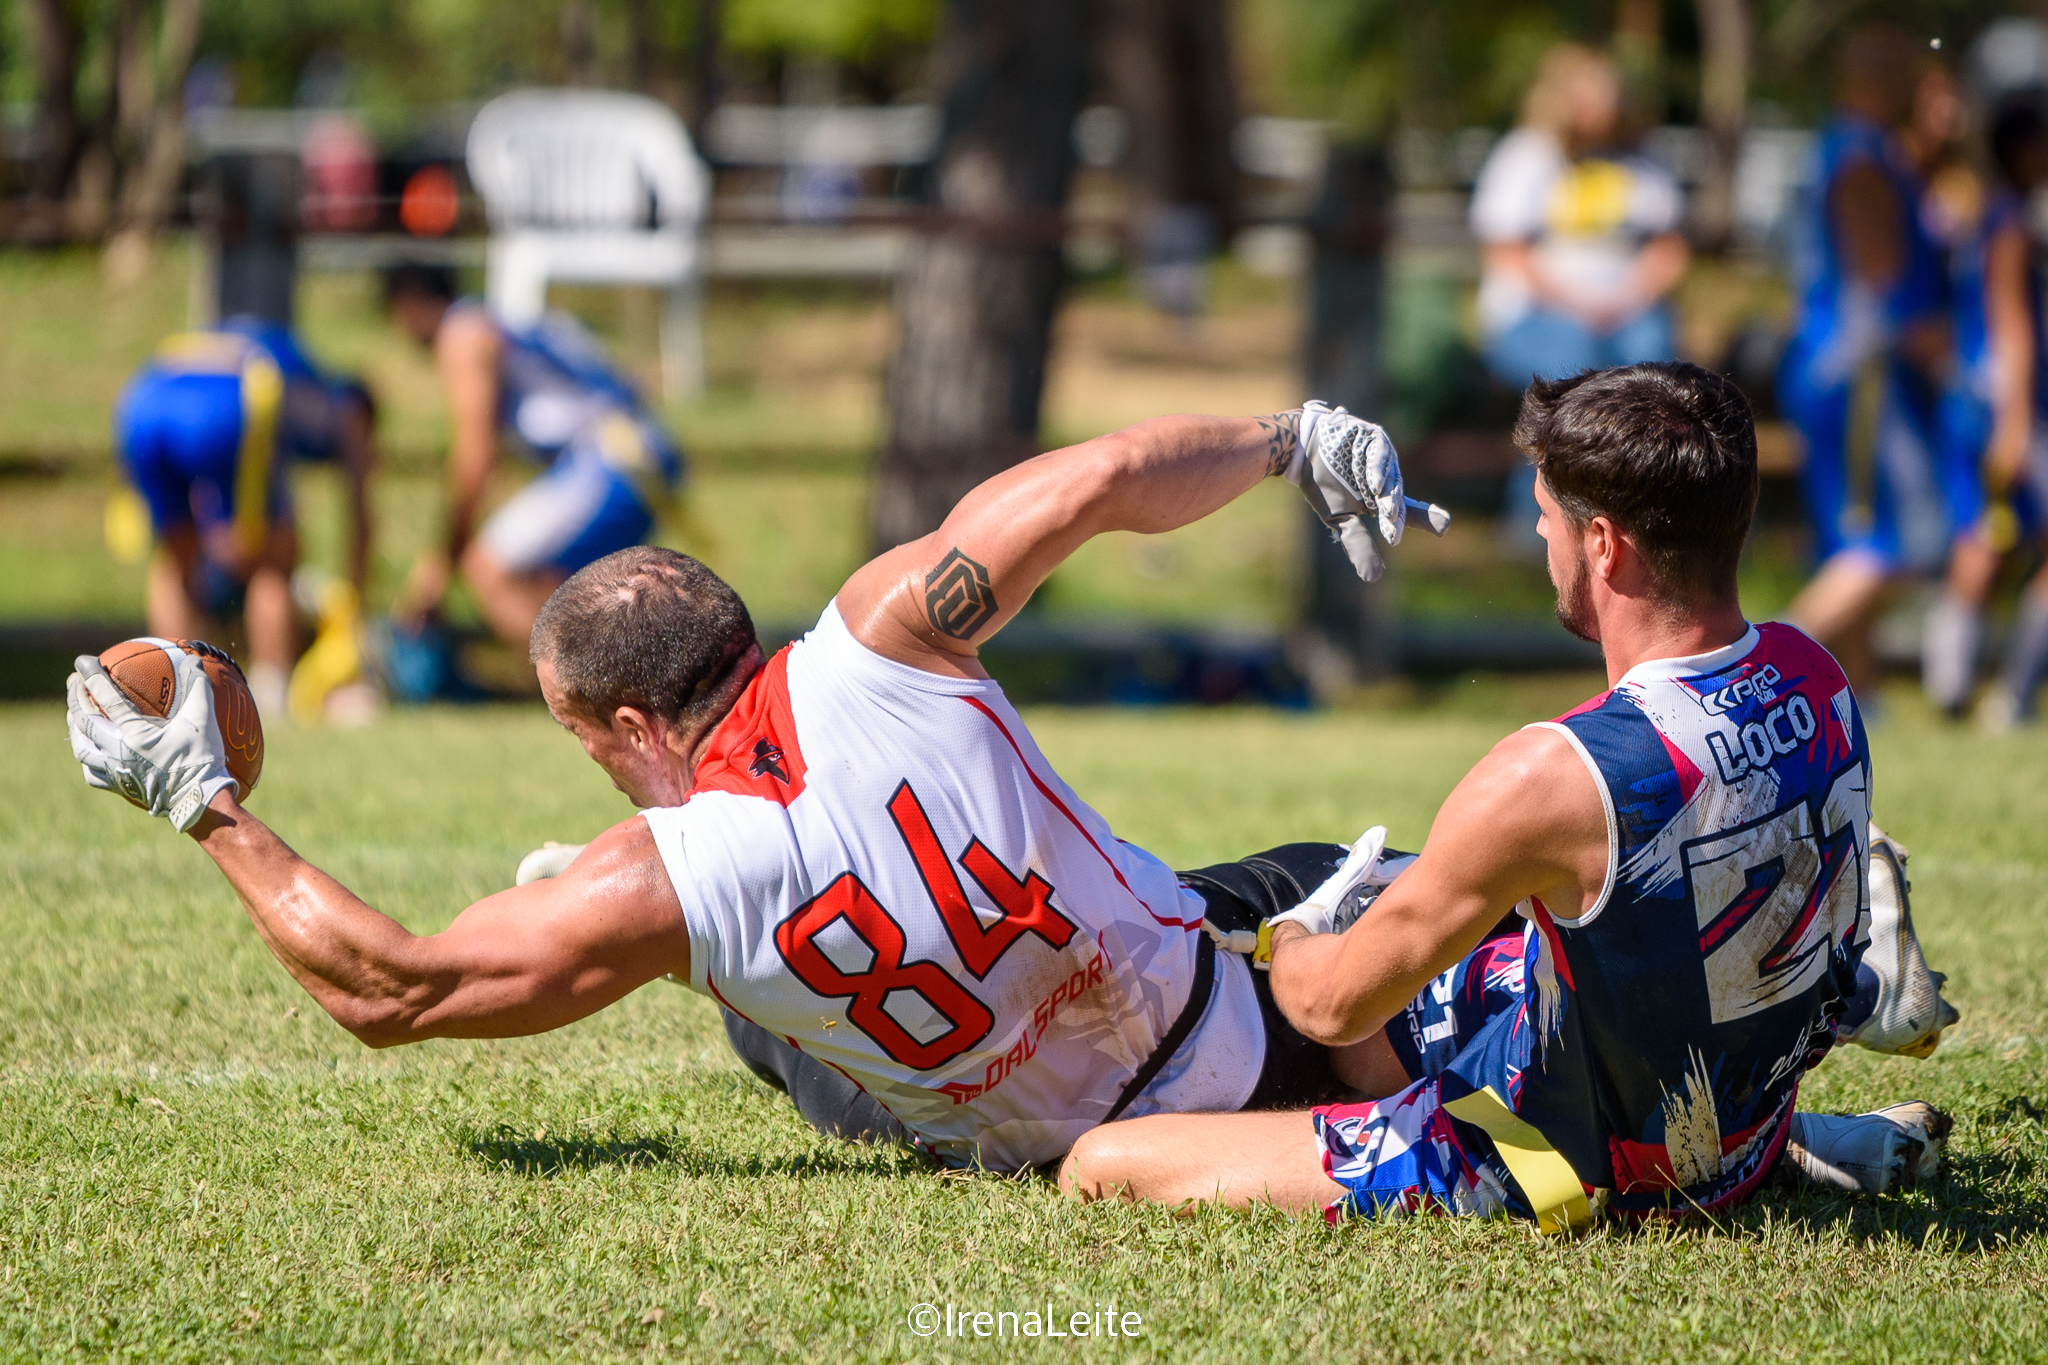 NEL WEEKEND RIPARTE ANCHE IL FLAG FOOTBALL